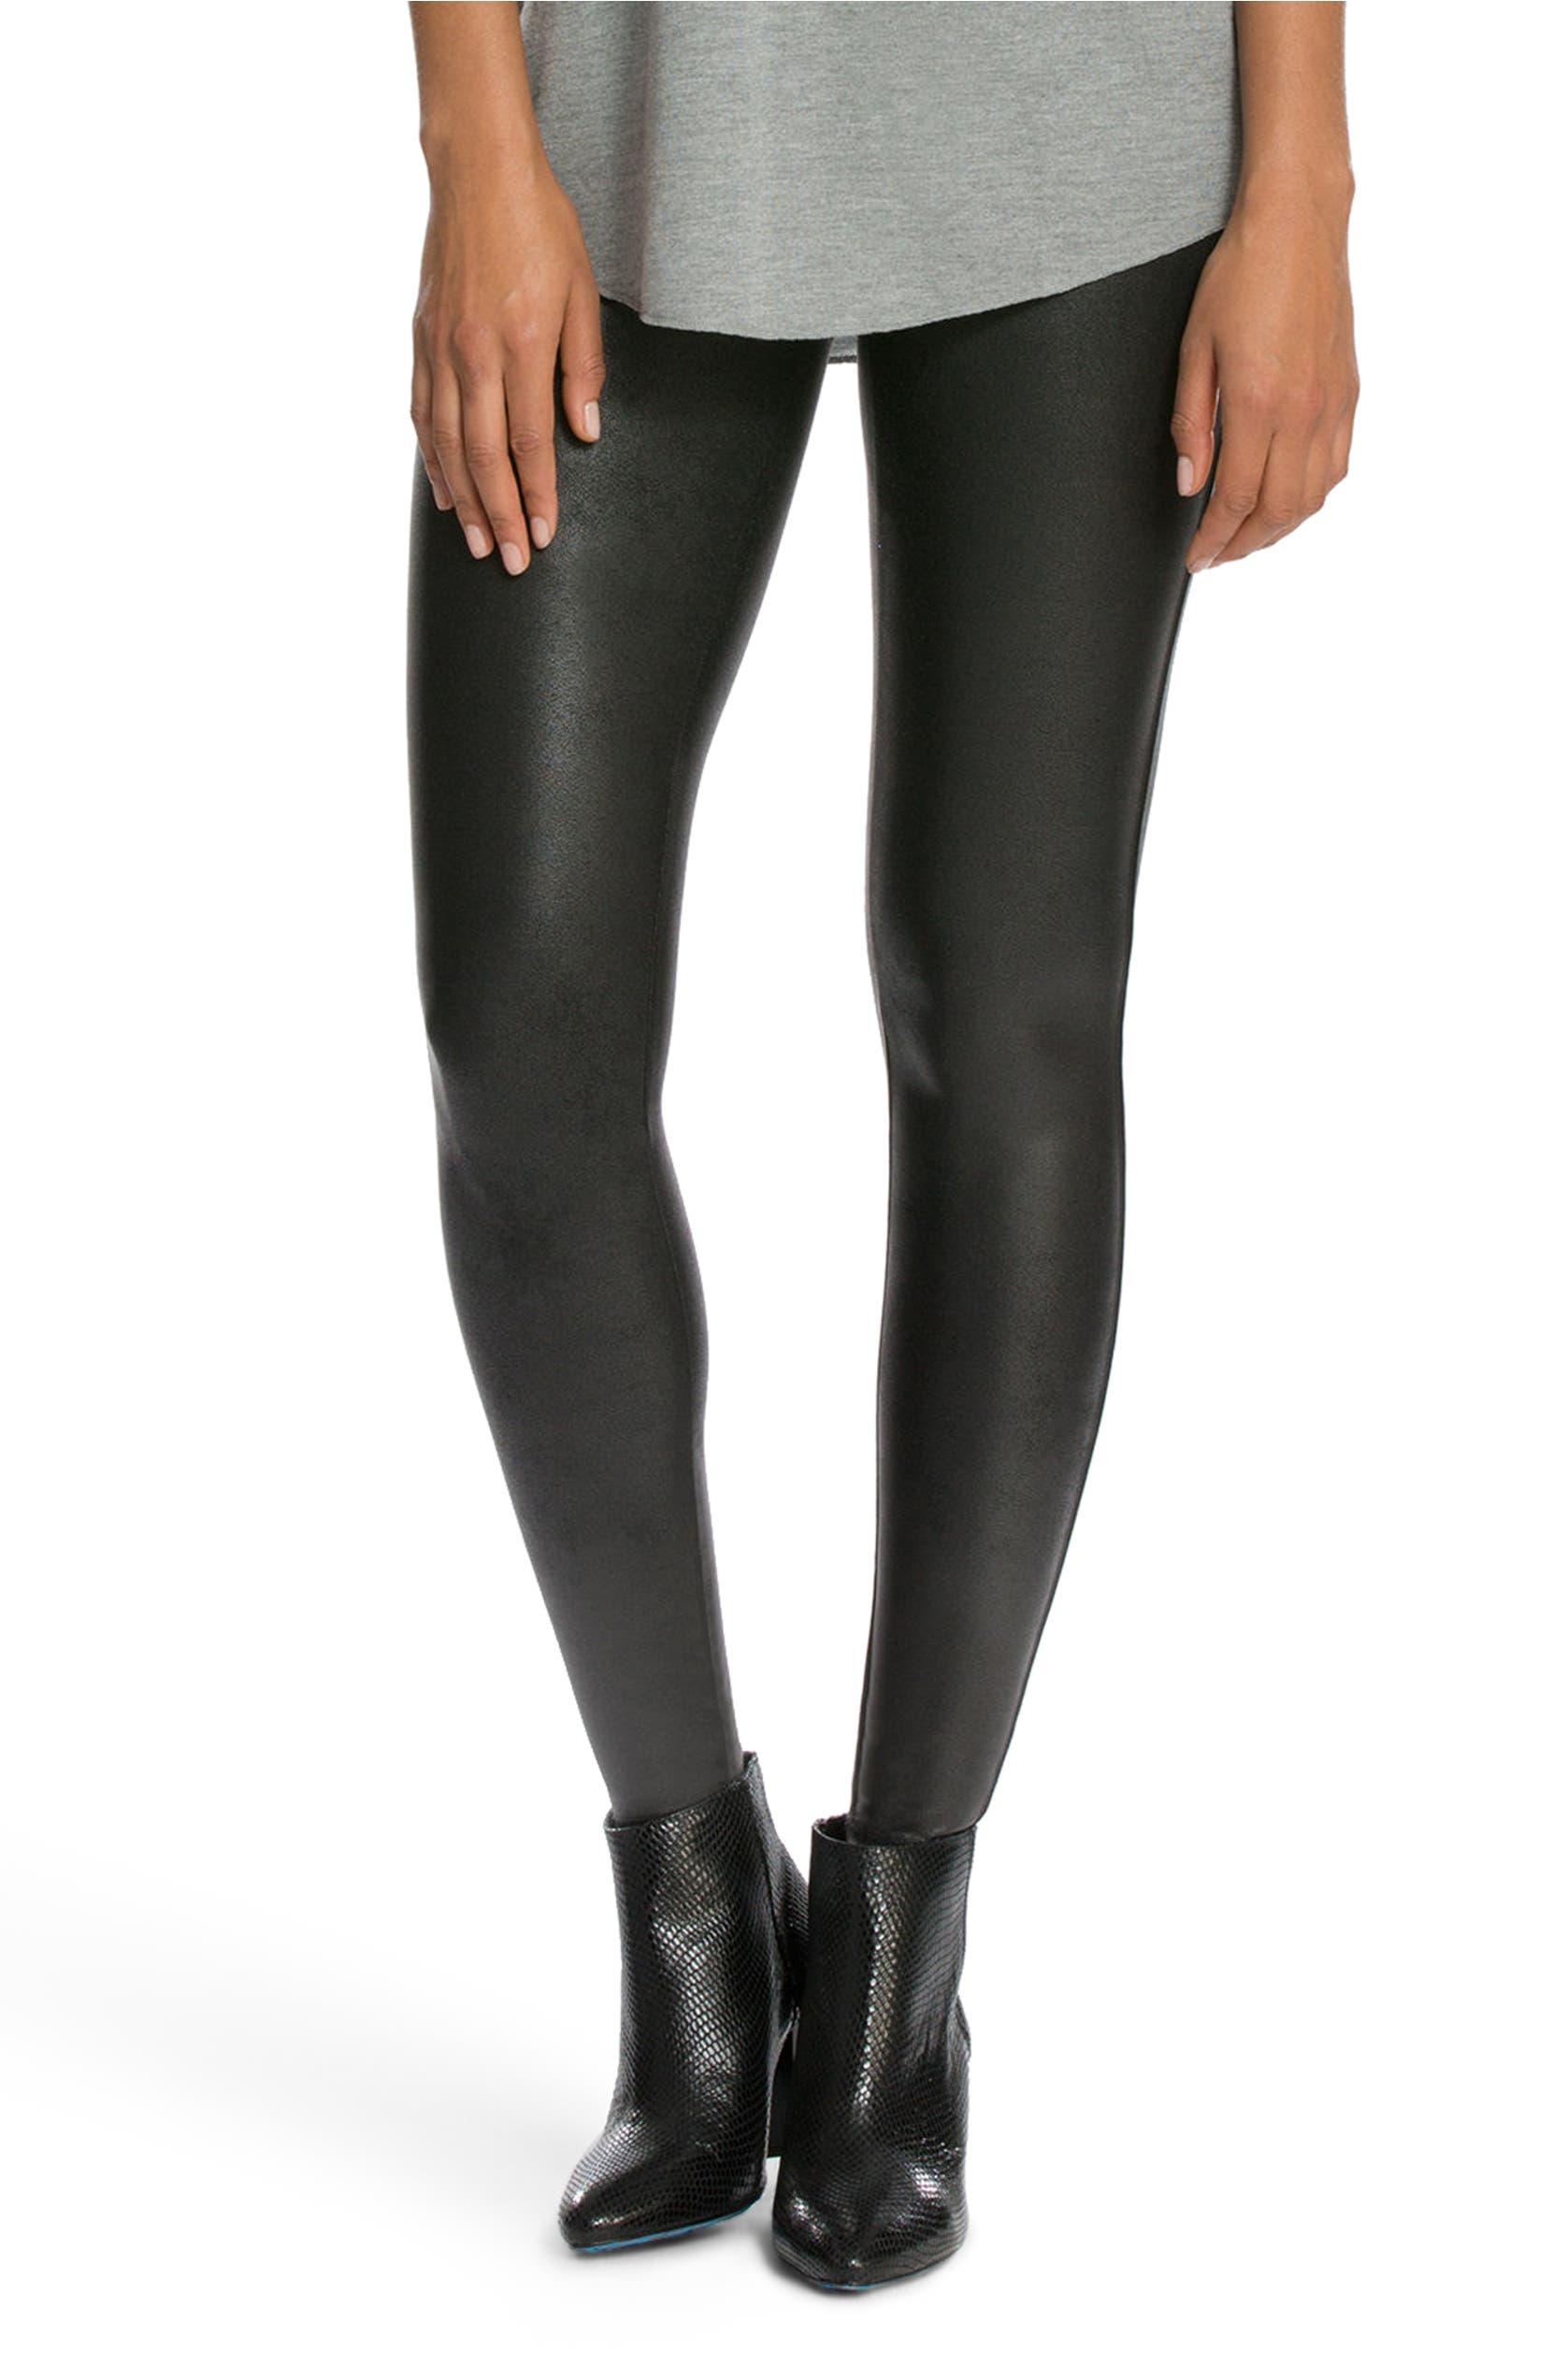 SPANX Faux Leather Leggings on sale at the Nordstrom anniversary sale